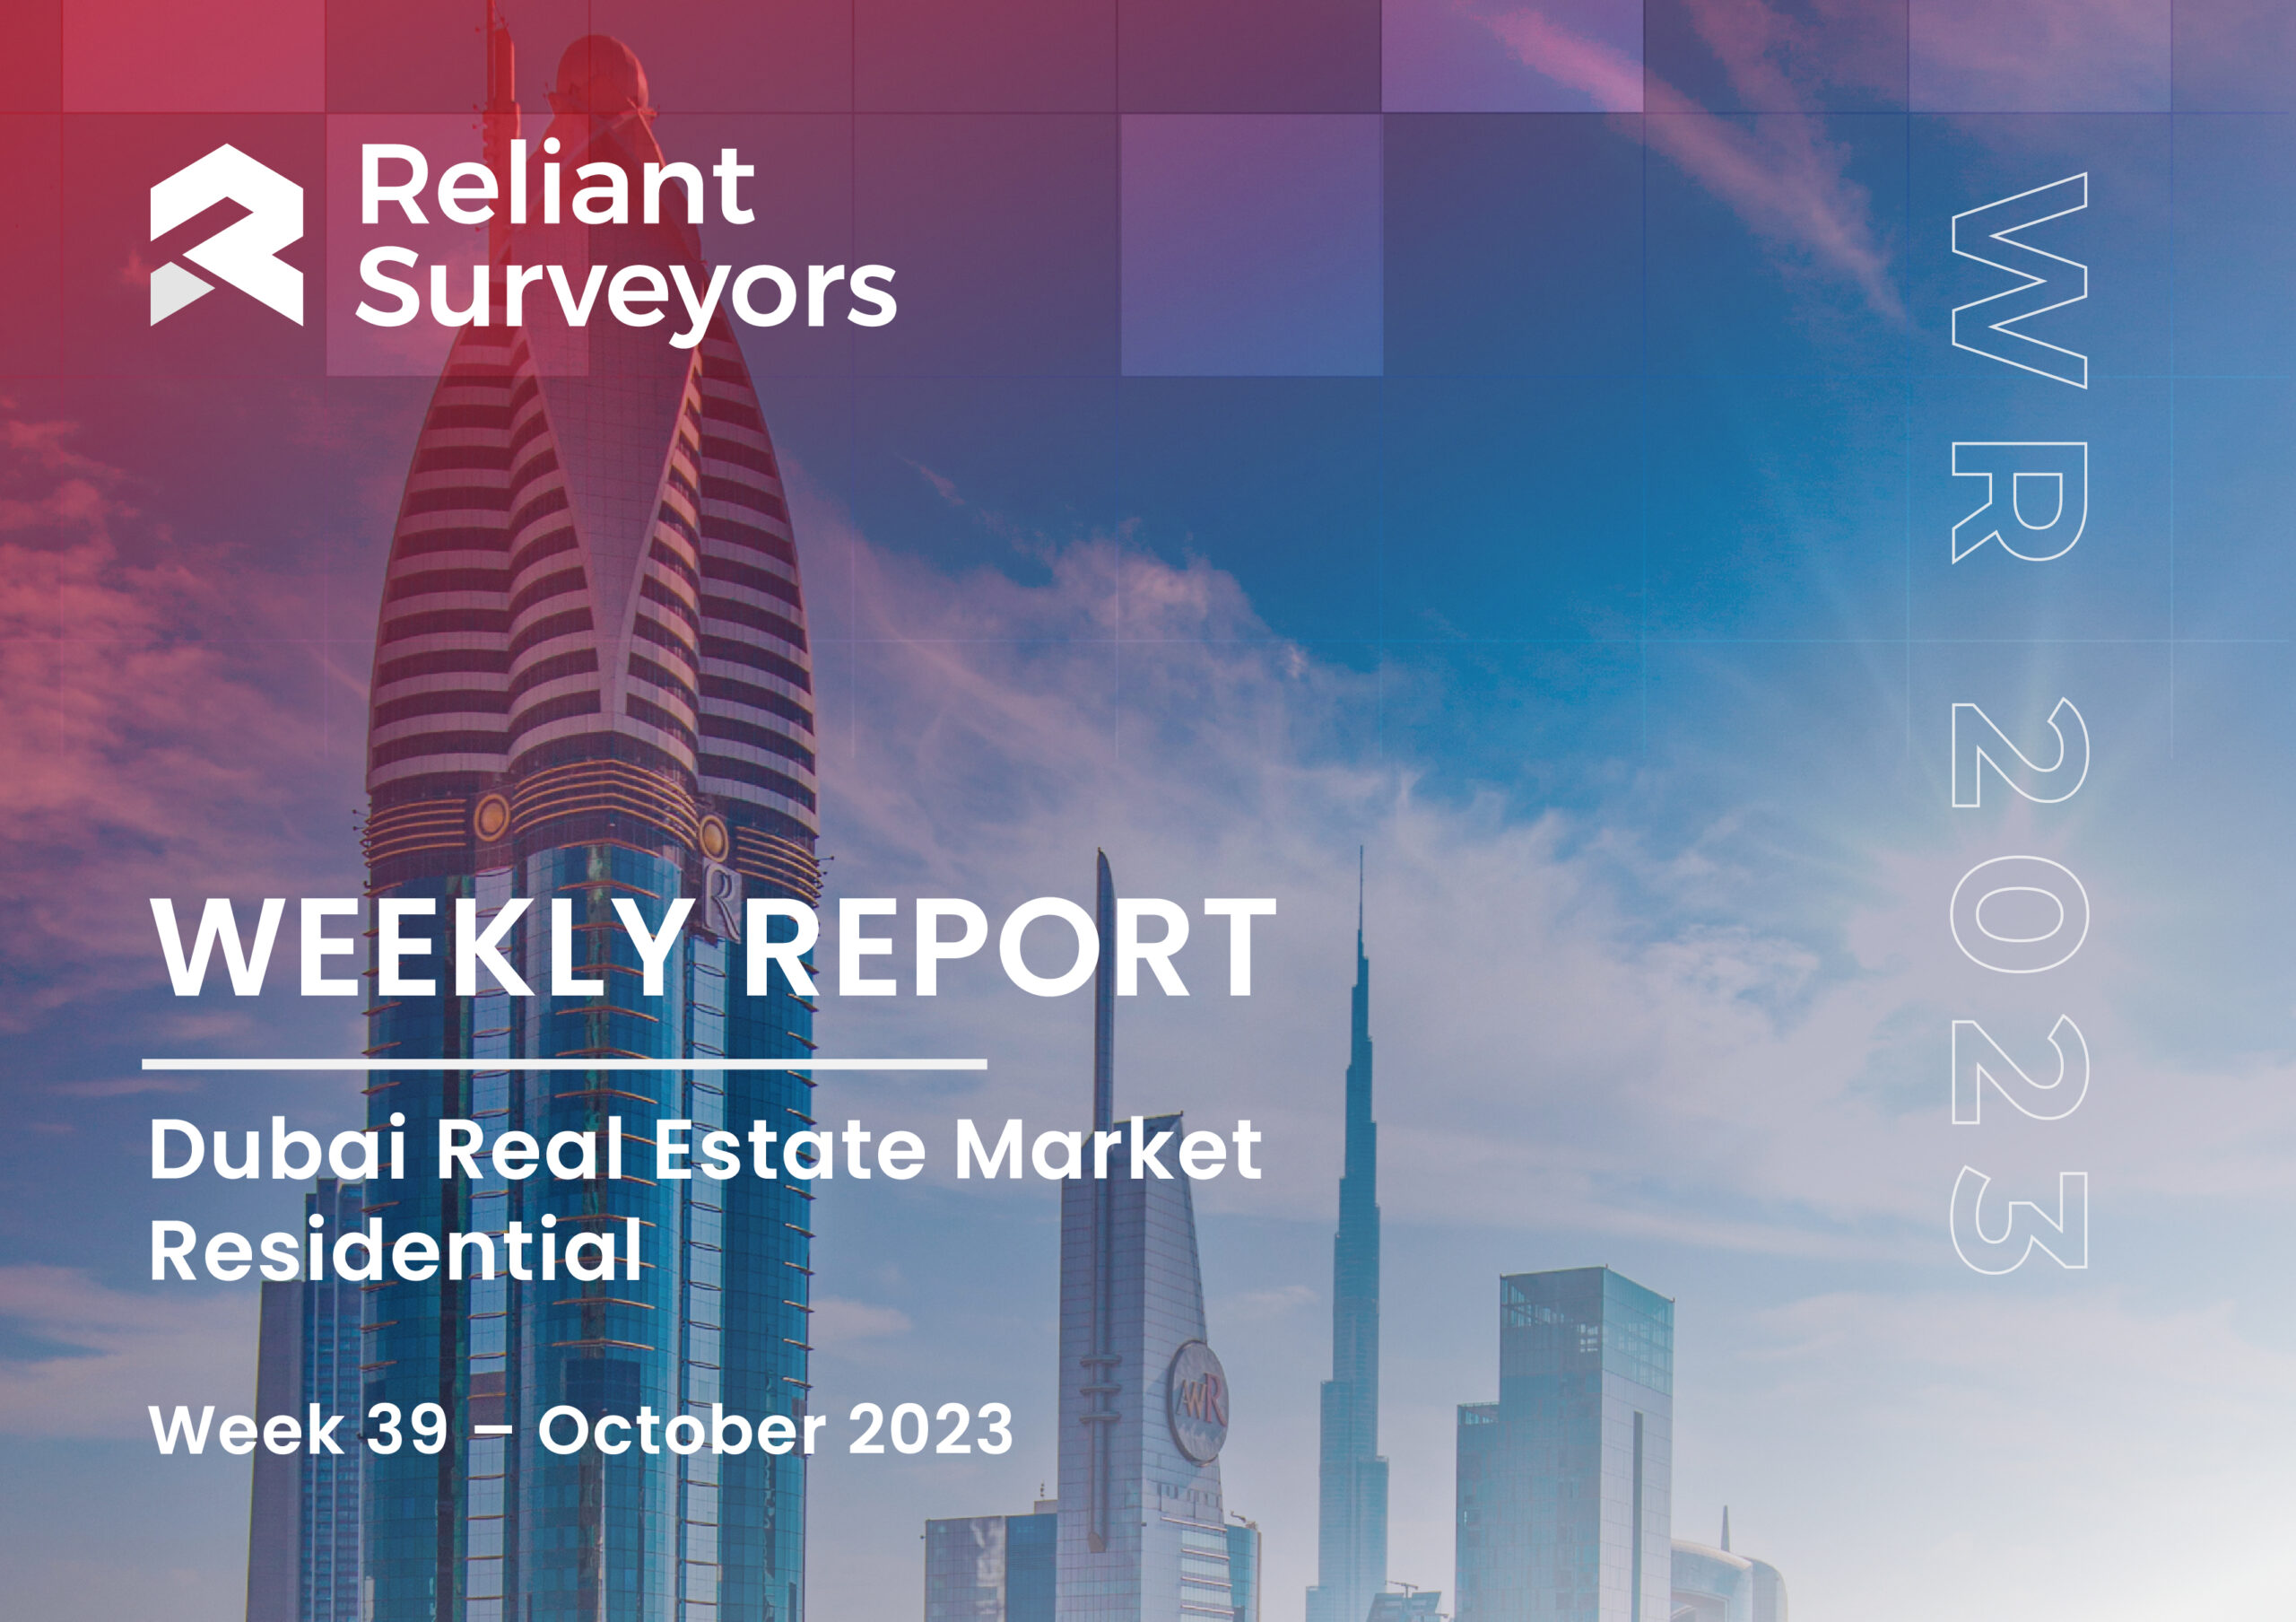 Real estate Research report 39 main image- Dubai realestate market - Residential - Week 39 , Reliant surveyors - valuation company in Dubai